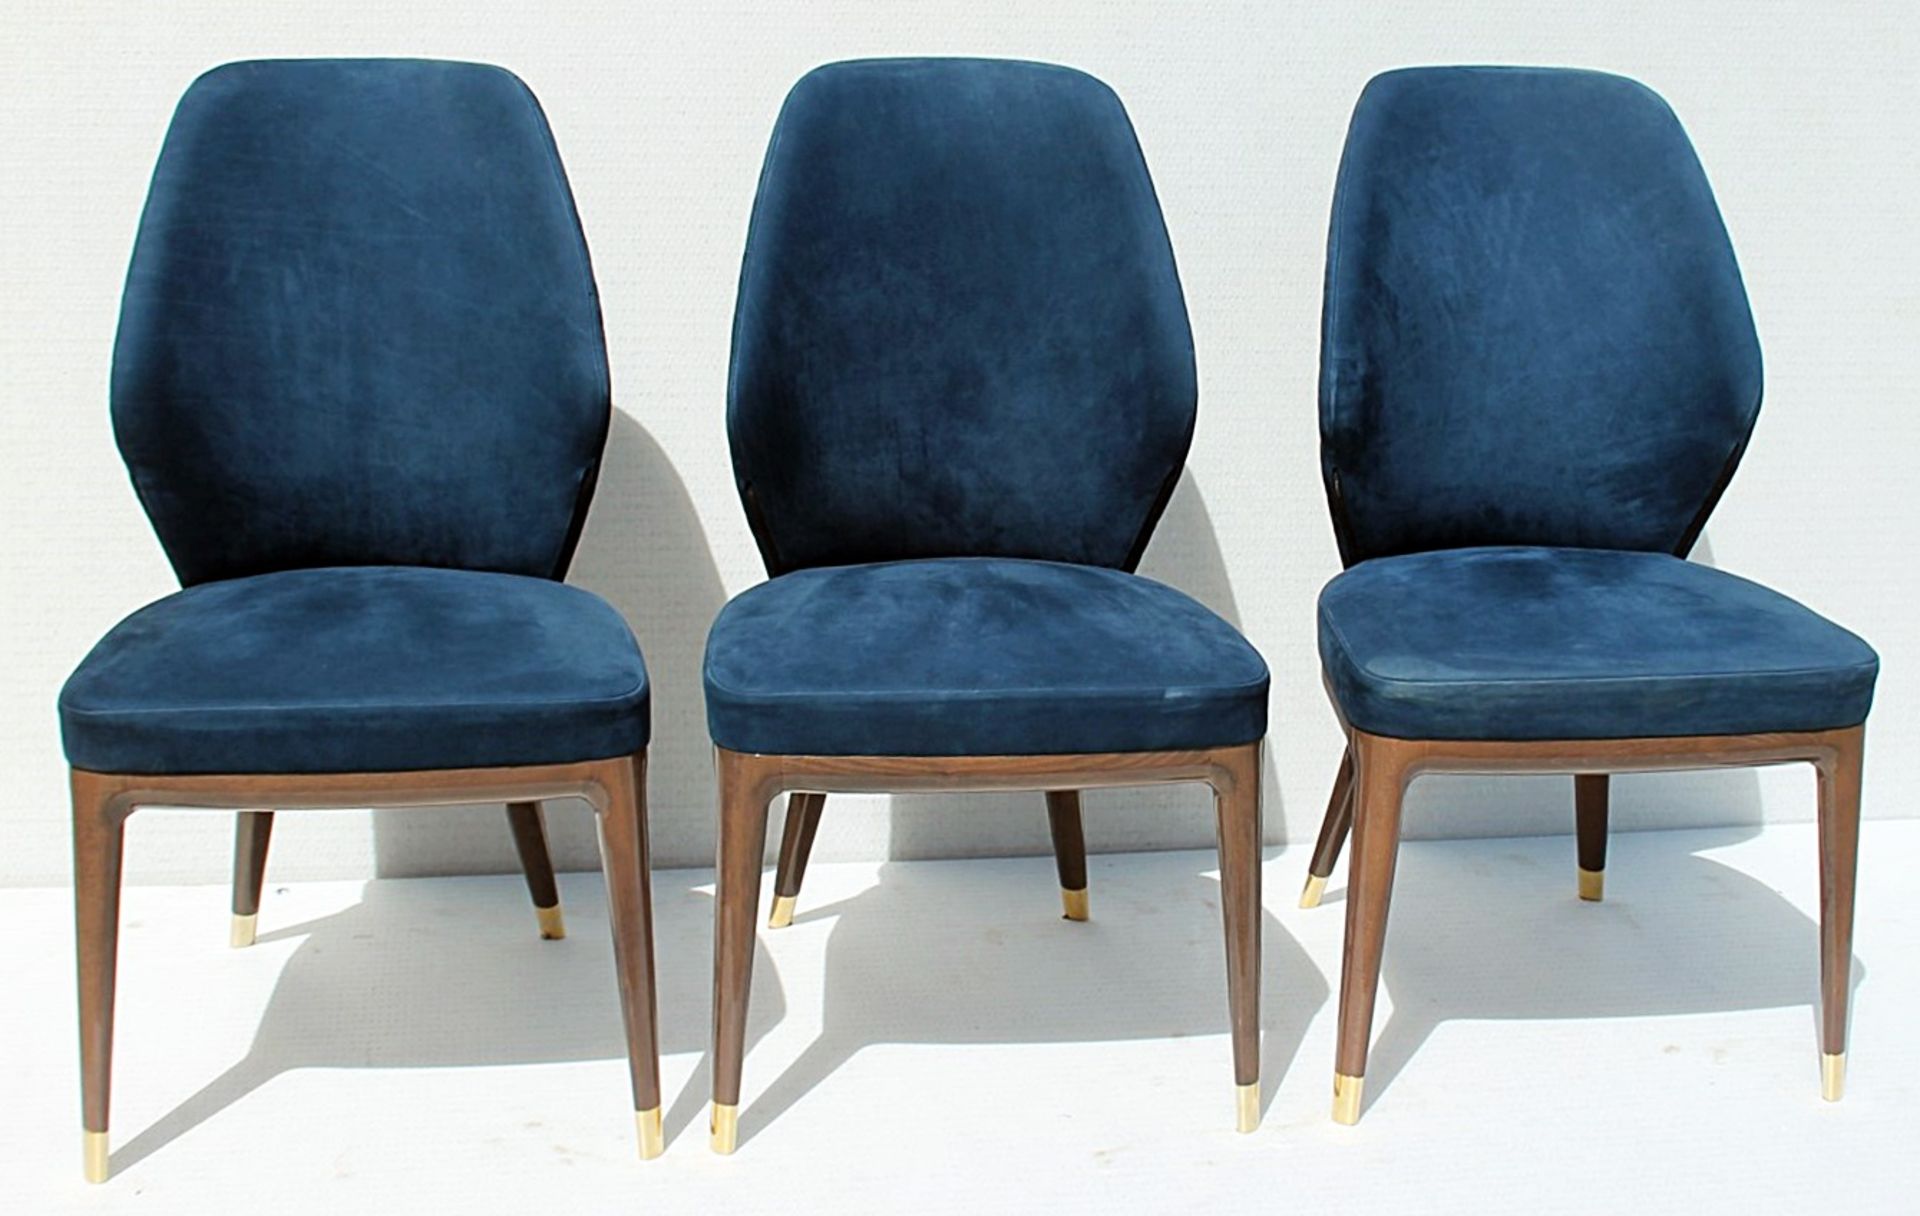 6 x GIORGIO COLLECTION 'Charisma' Luxury Dining Side Chairs In Blue - Total Original Price £15,330 - Image 8 of 17